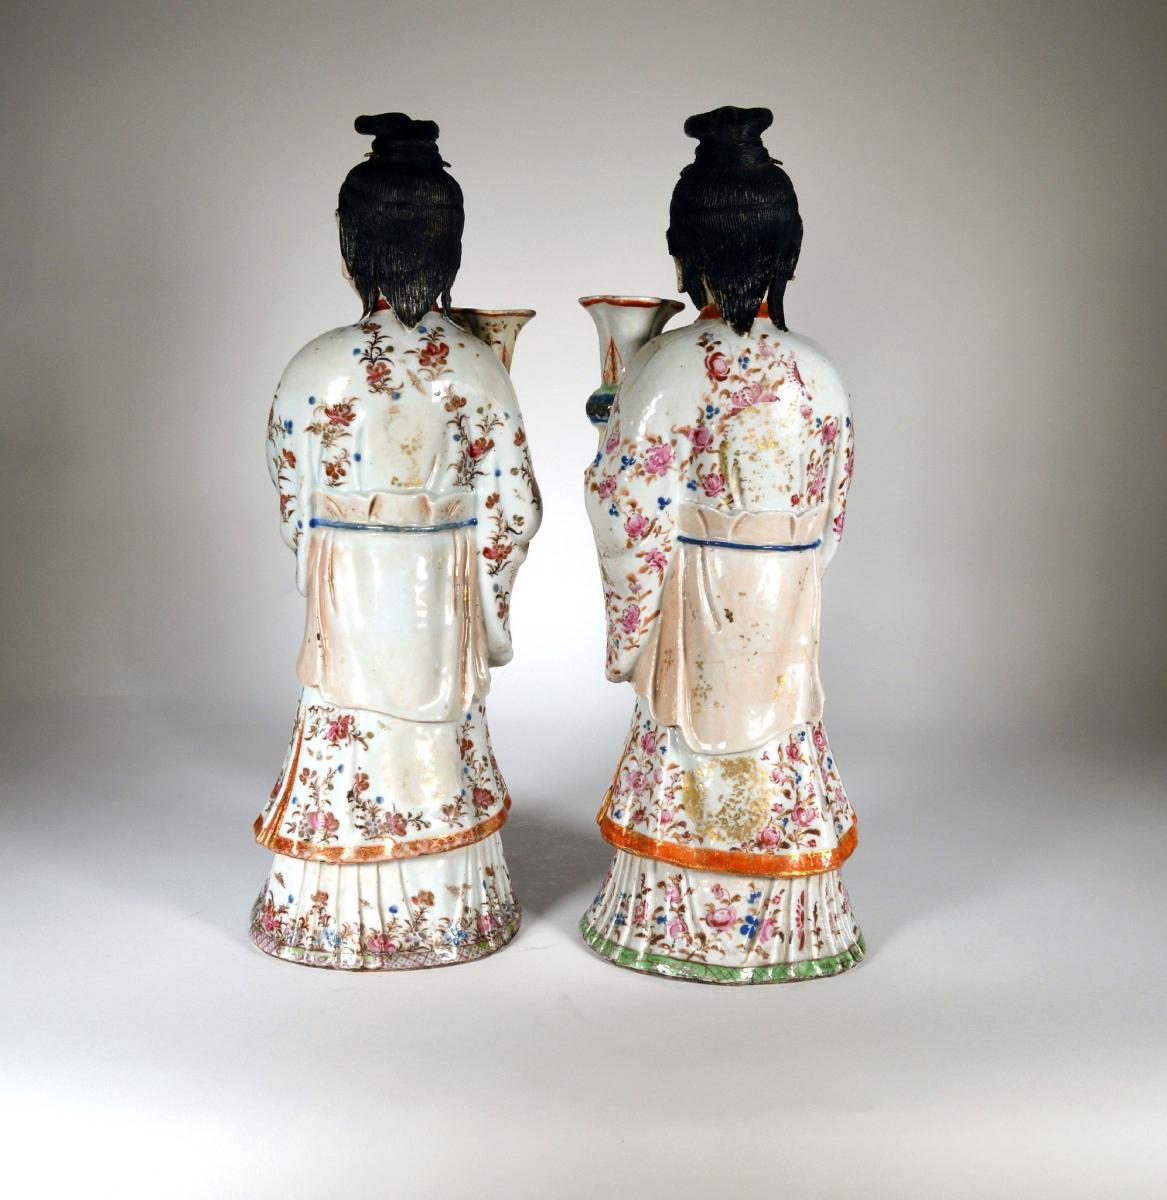 Chinese Export Pair of Maiden Candlesticks, Circa 1760-75